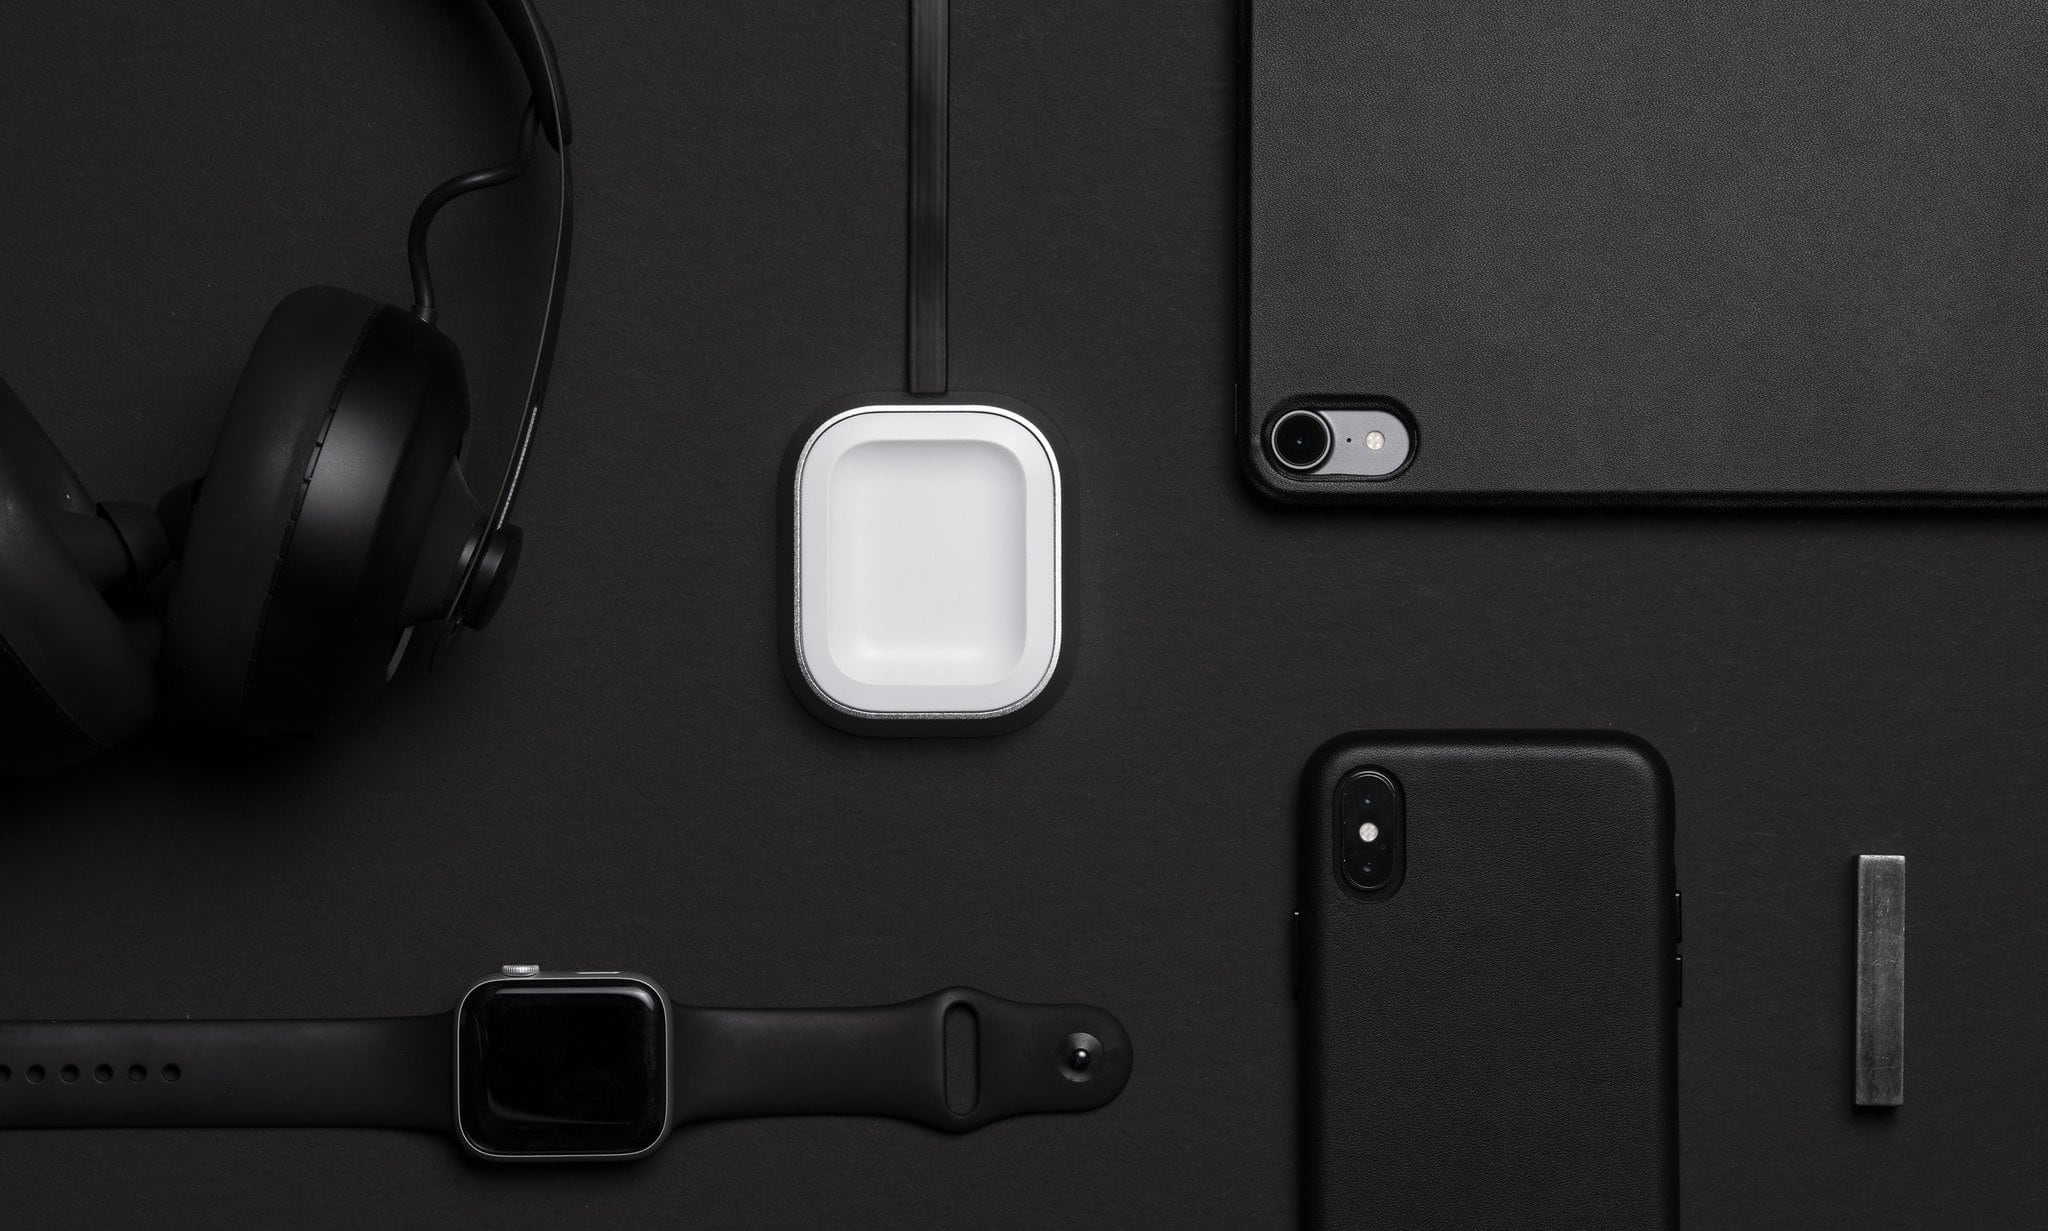 Proper Wireless Charging Dock Apple AirPods Holder keeps your earbuds safe